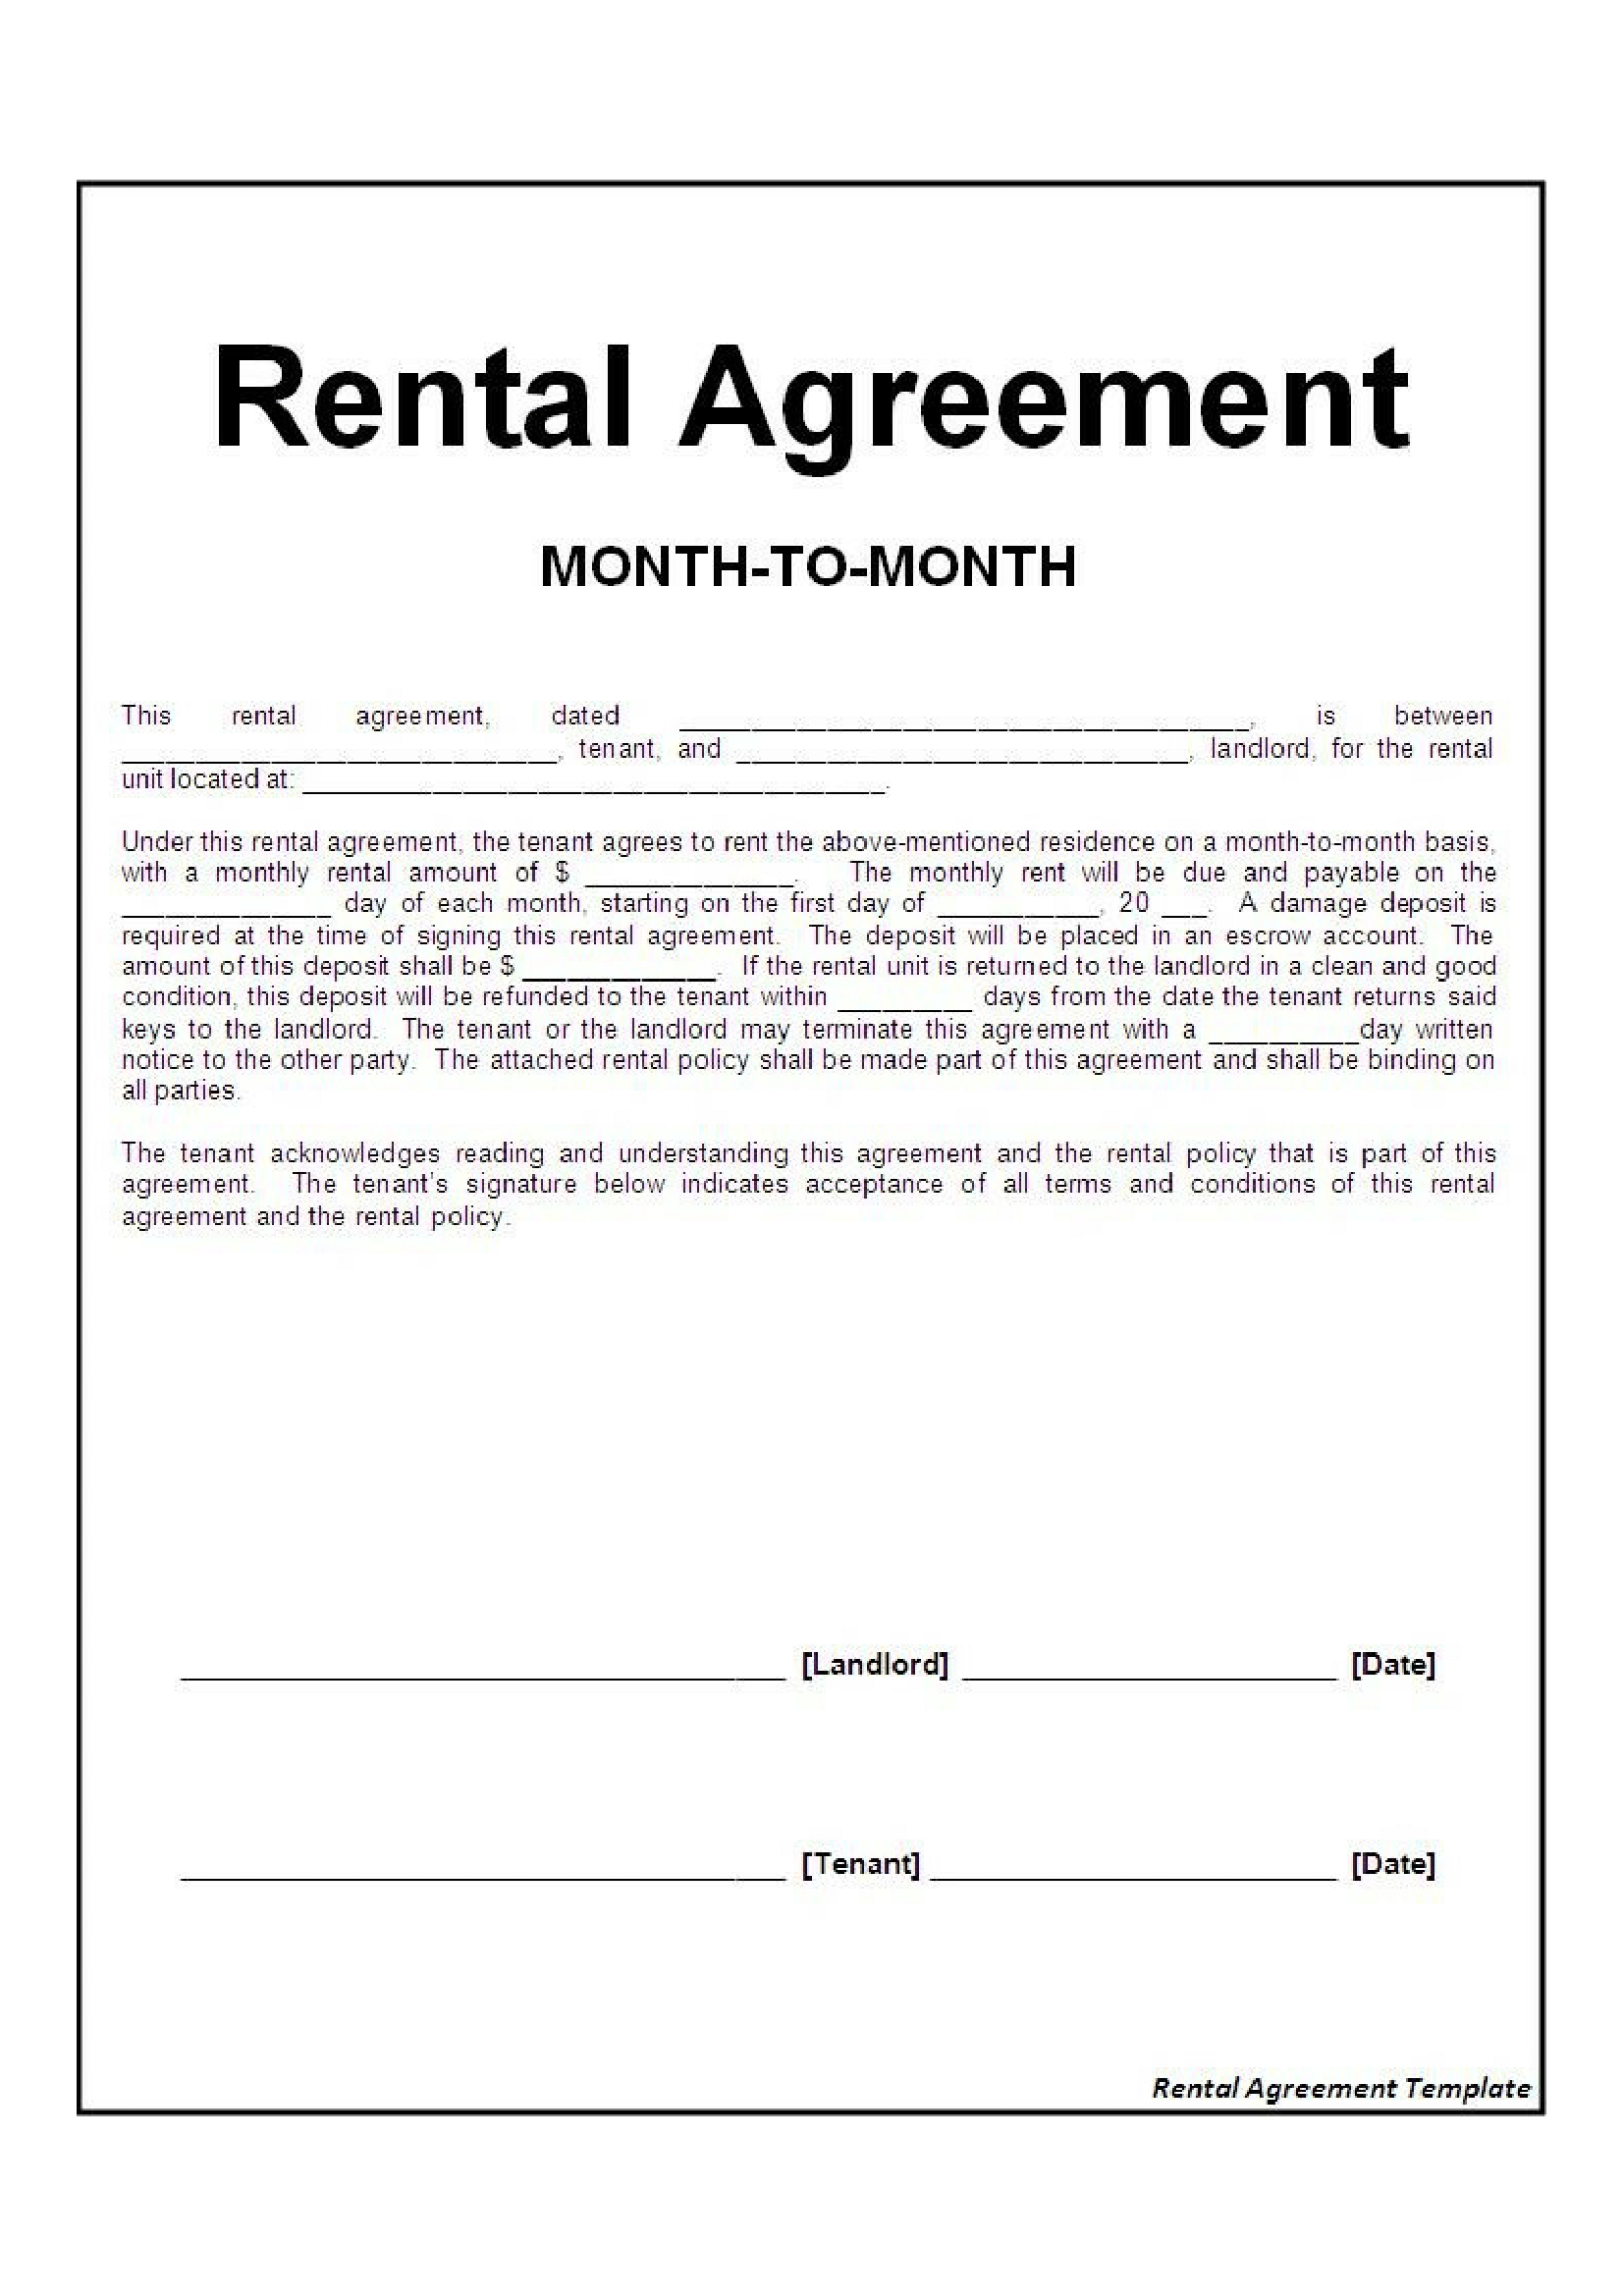 Rental Agreement Free Form Monthly Rental Agreement Form